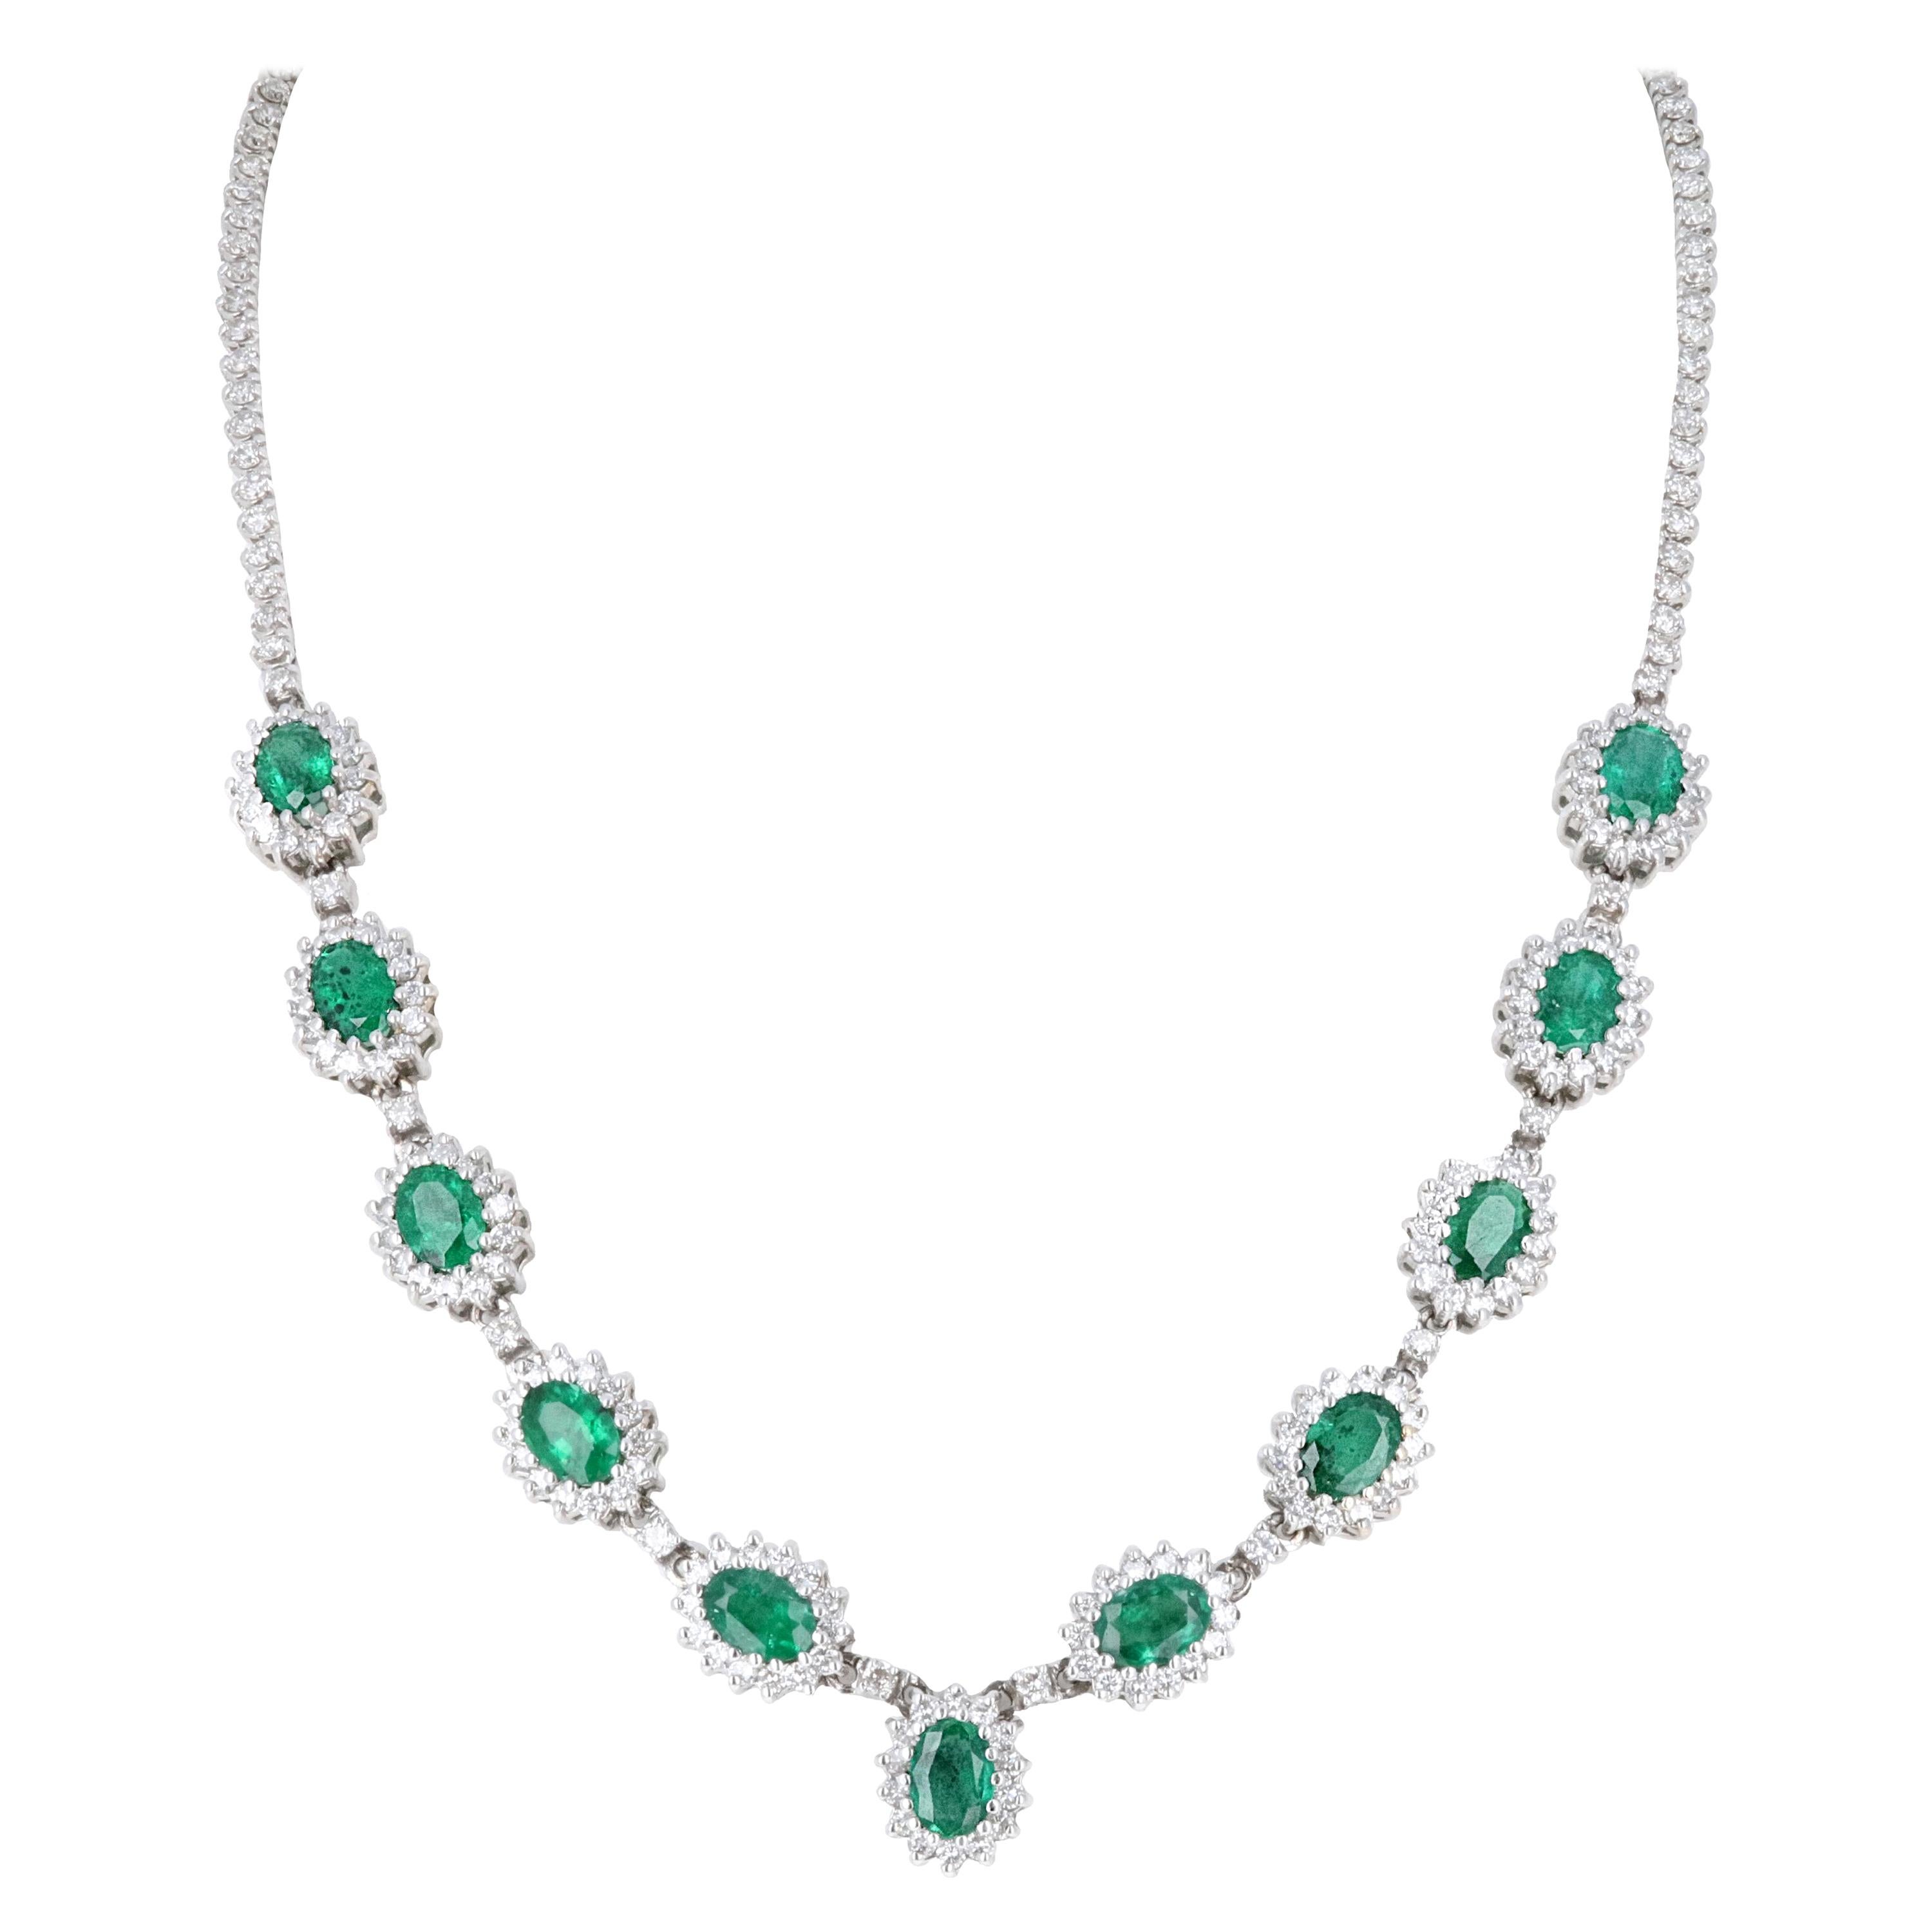 18 Karat White Gold 6.84ct Diamond and 11ct Emerald Drop Necklace. 16 inches